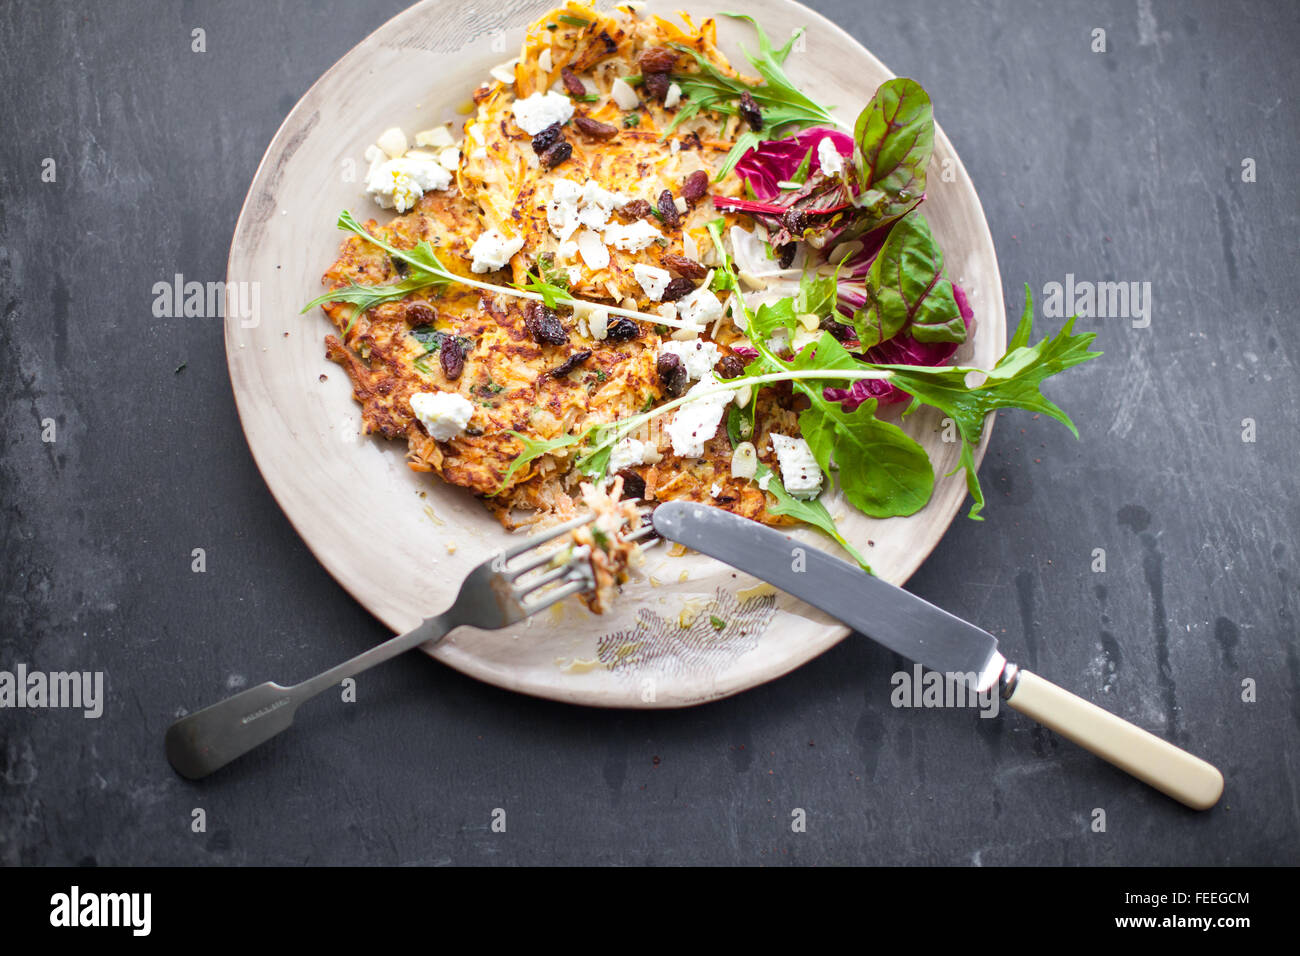 carrot, parsnip, chili and coriander rosti with organic salad, goats cheese, sultanas and flaked almonds. Stock Photo